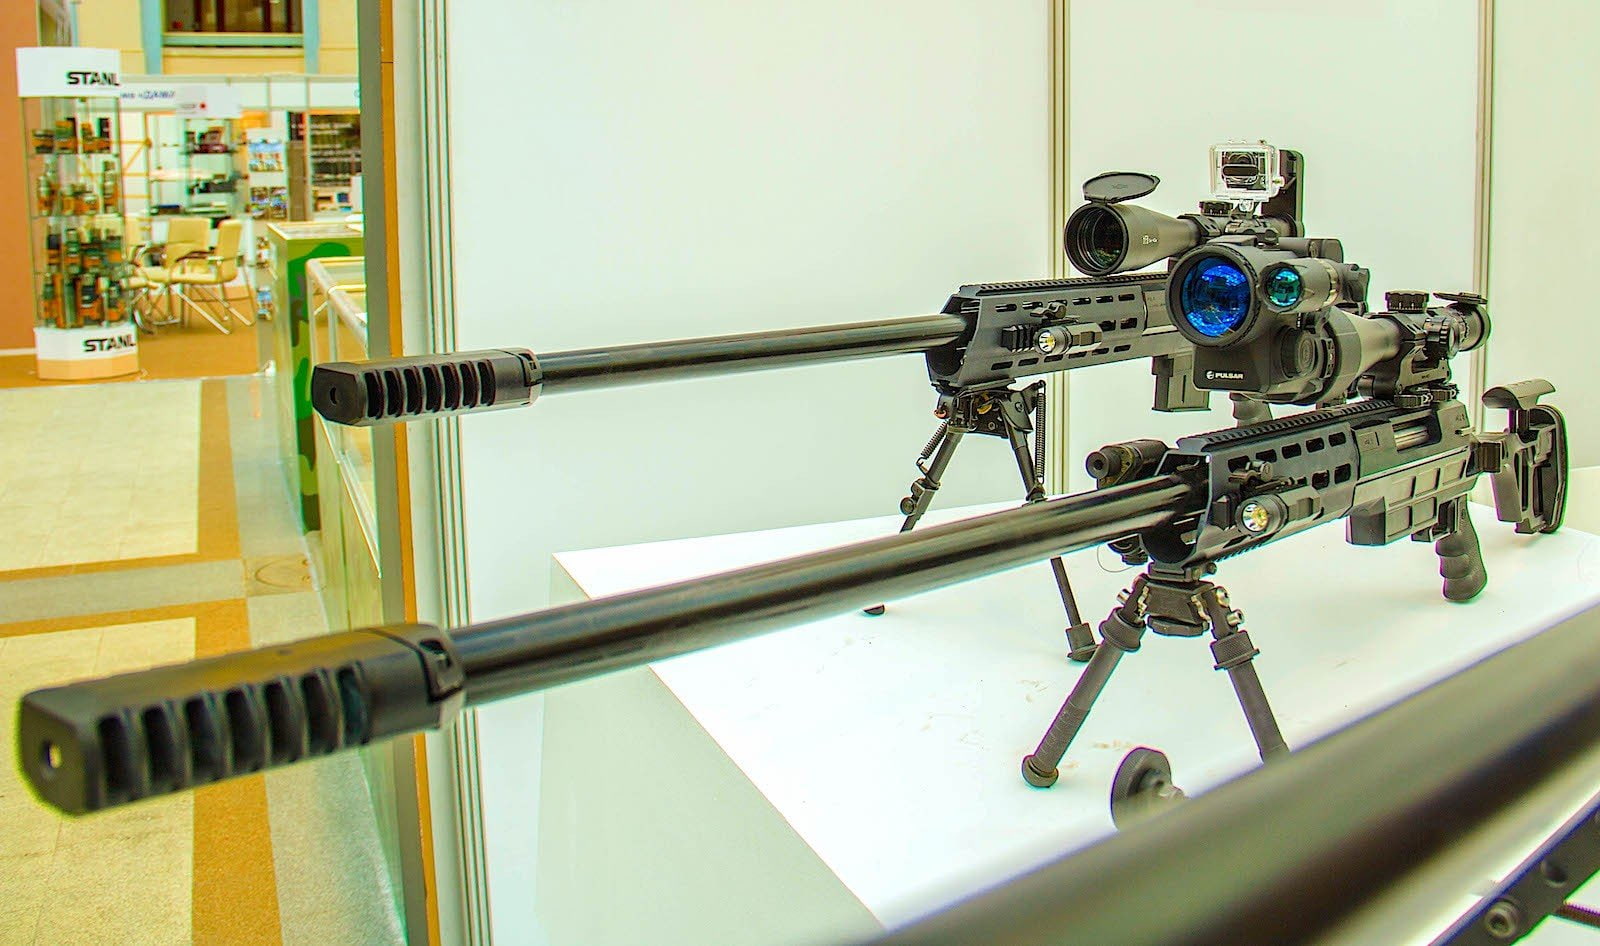 lobaevarms sniper rifle, indoors, no people, technology, machinery